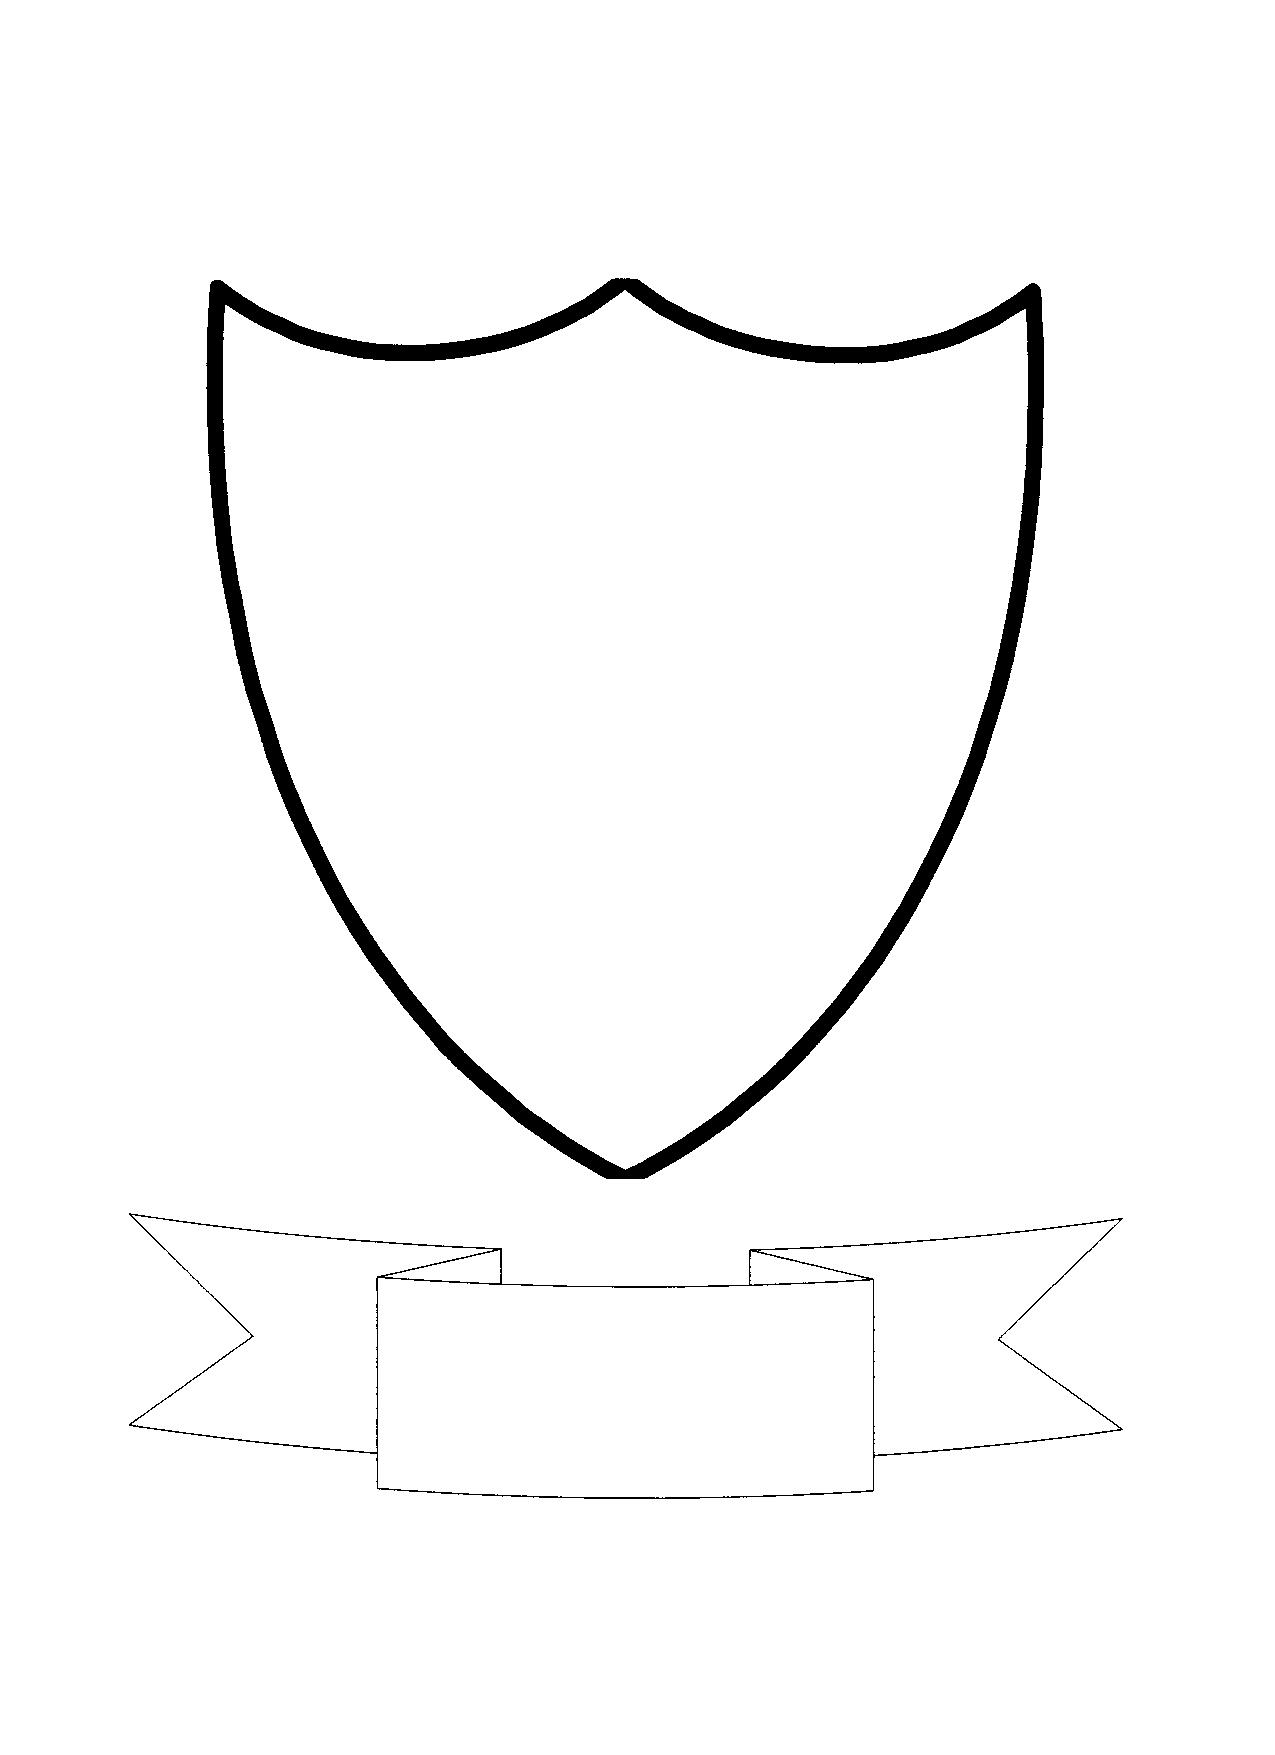 Coat Of Arms Templates - Clipart library